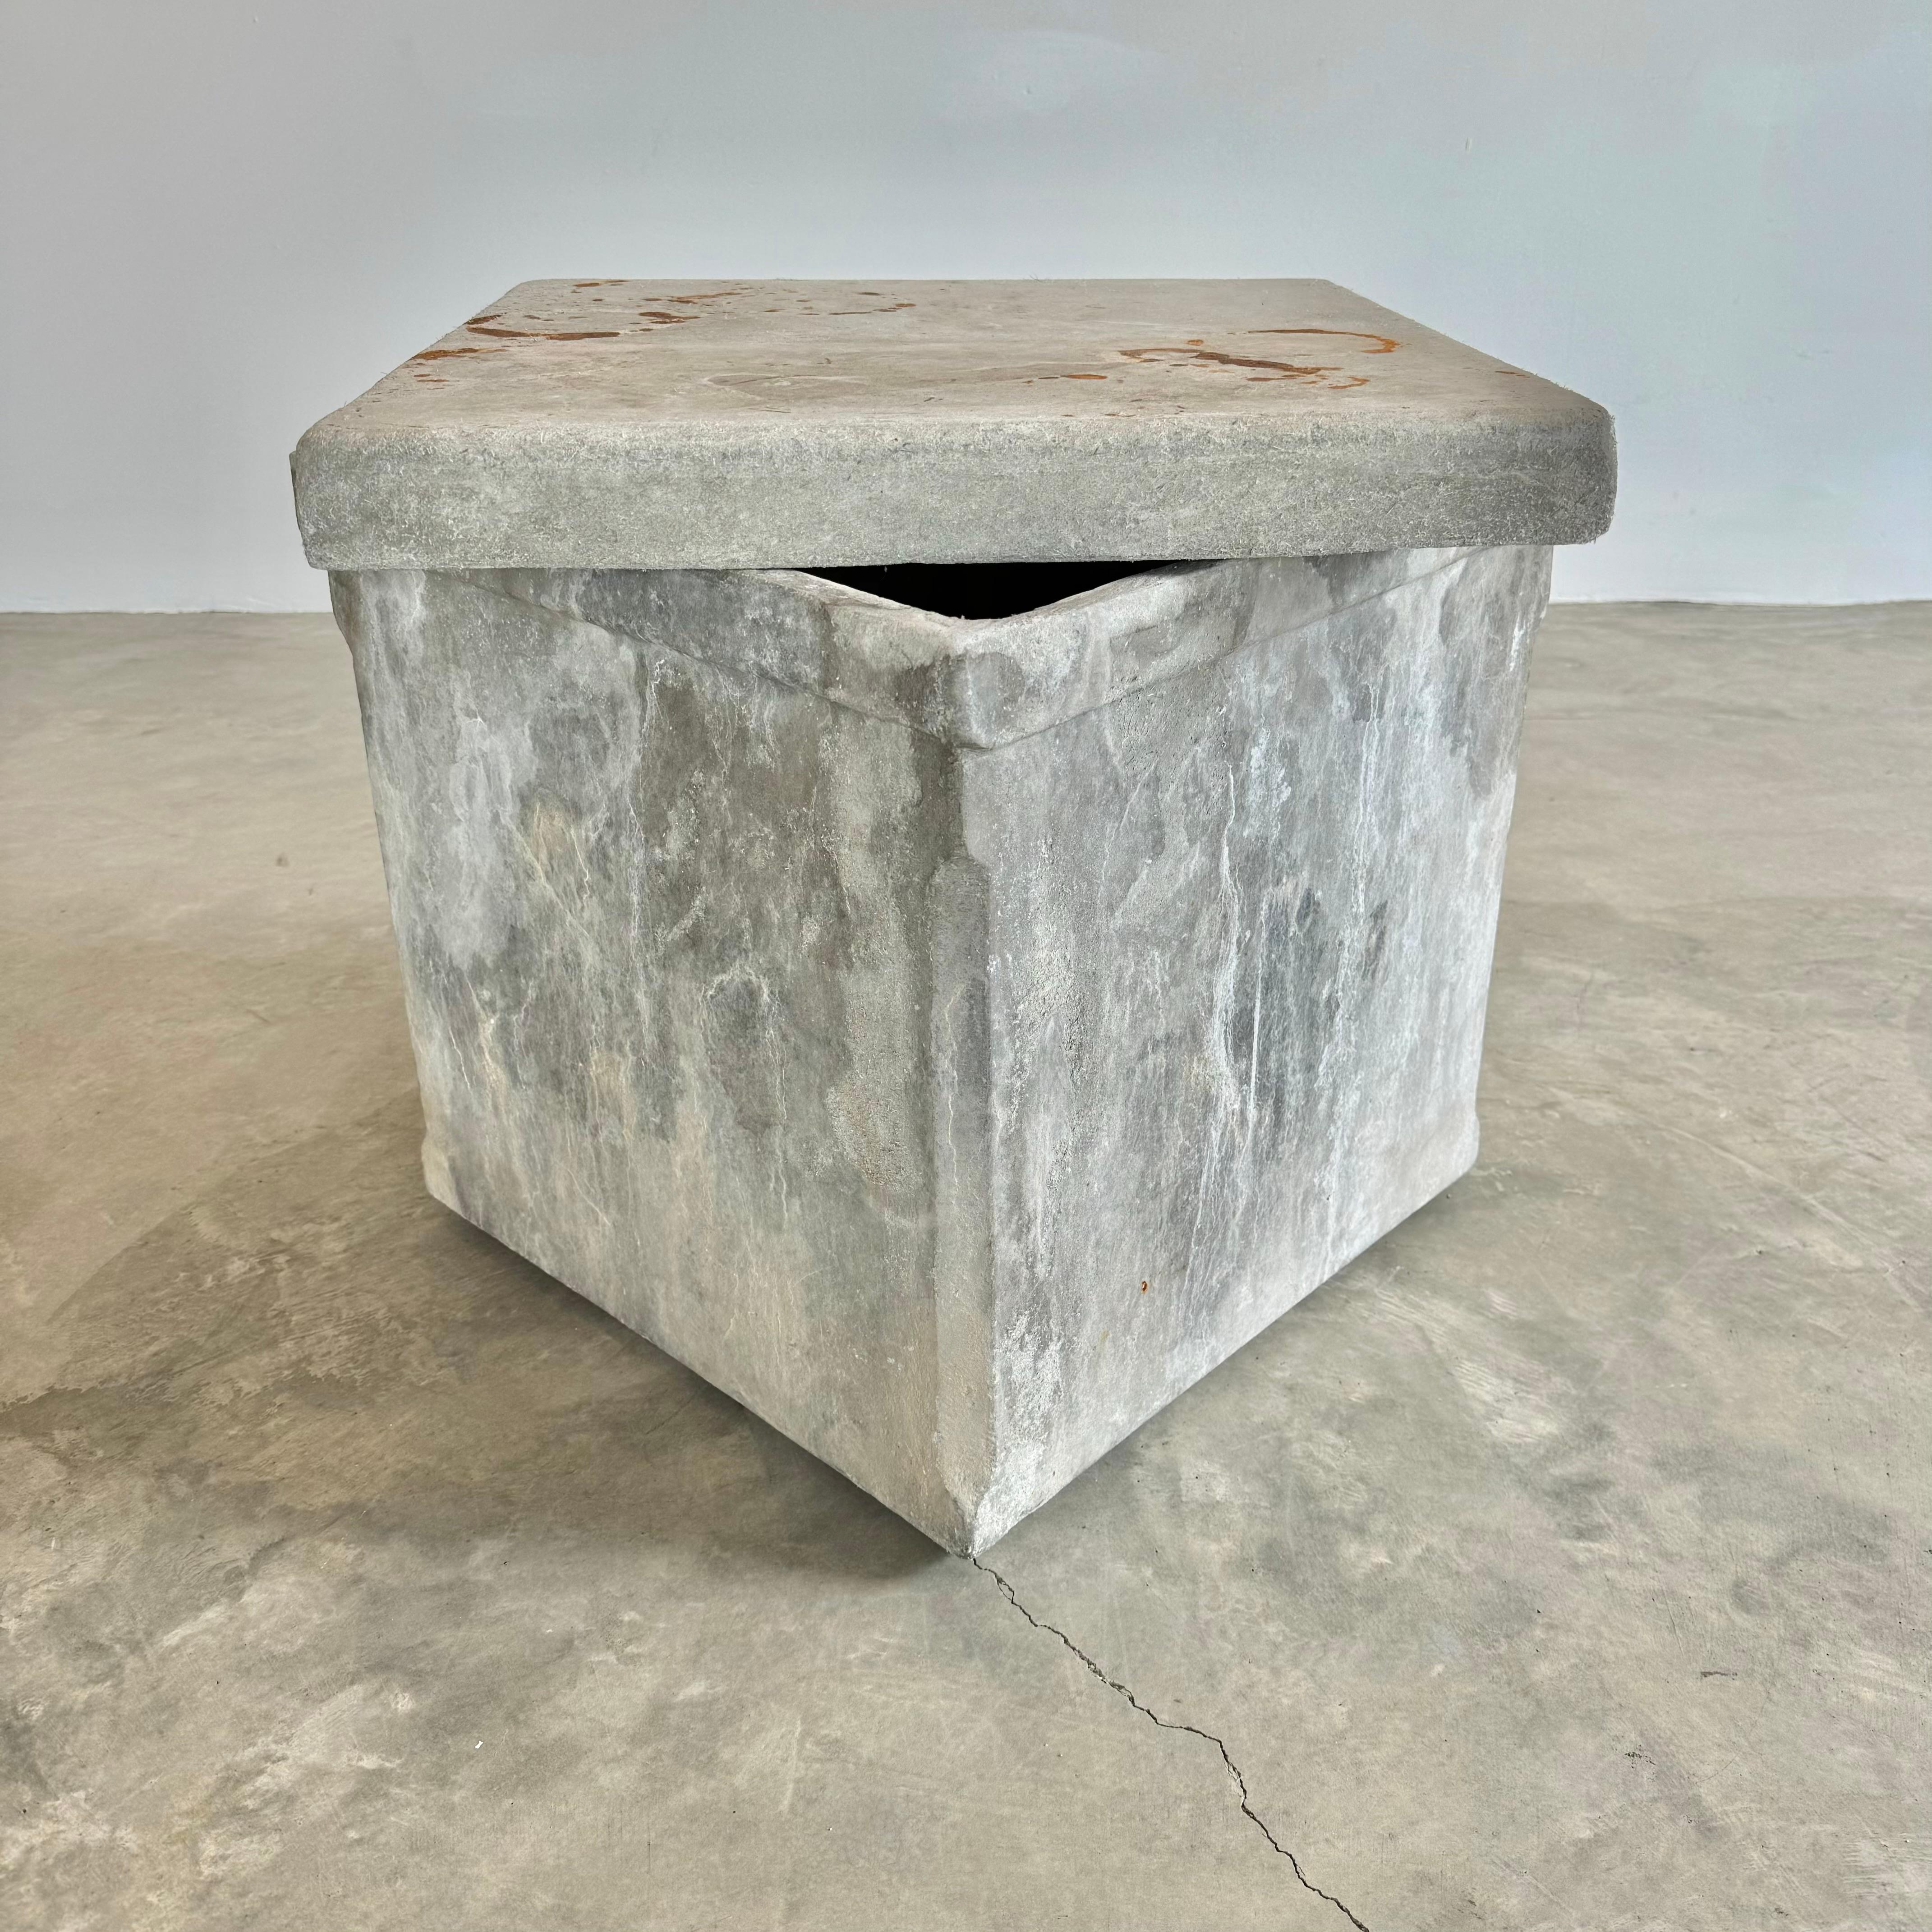 Willy Guhl Concrete Box with Lid, 1960s Switzerland For Sale 2